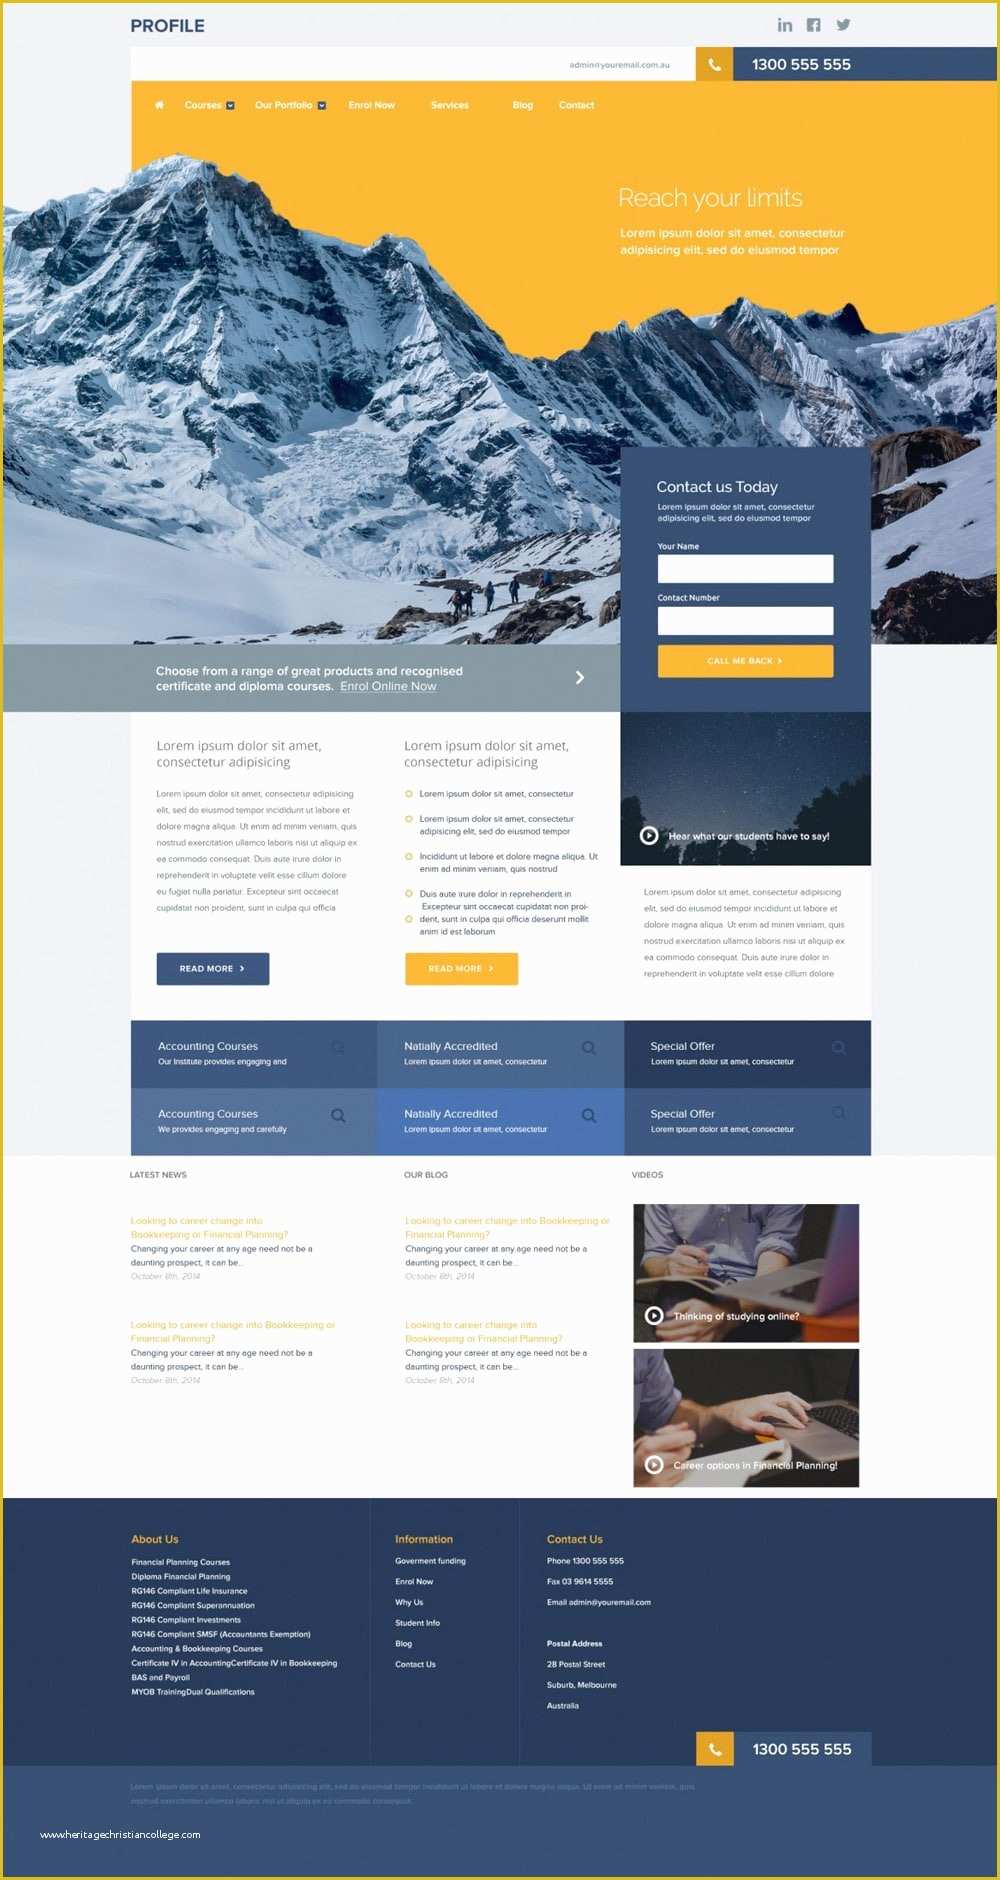 Free Photoshop Templates Of Free Corporate and Business Web Templates Psd